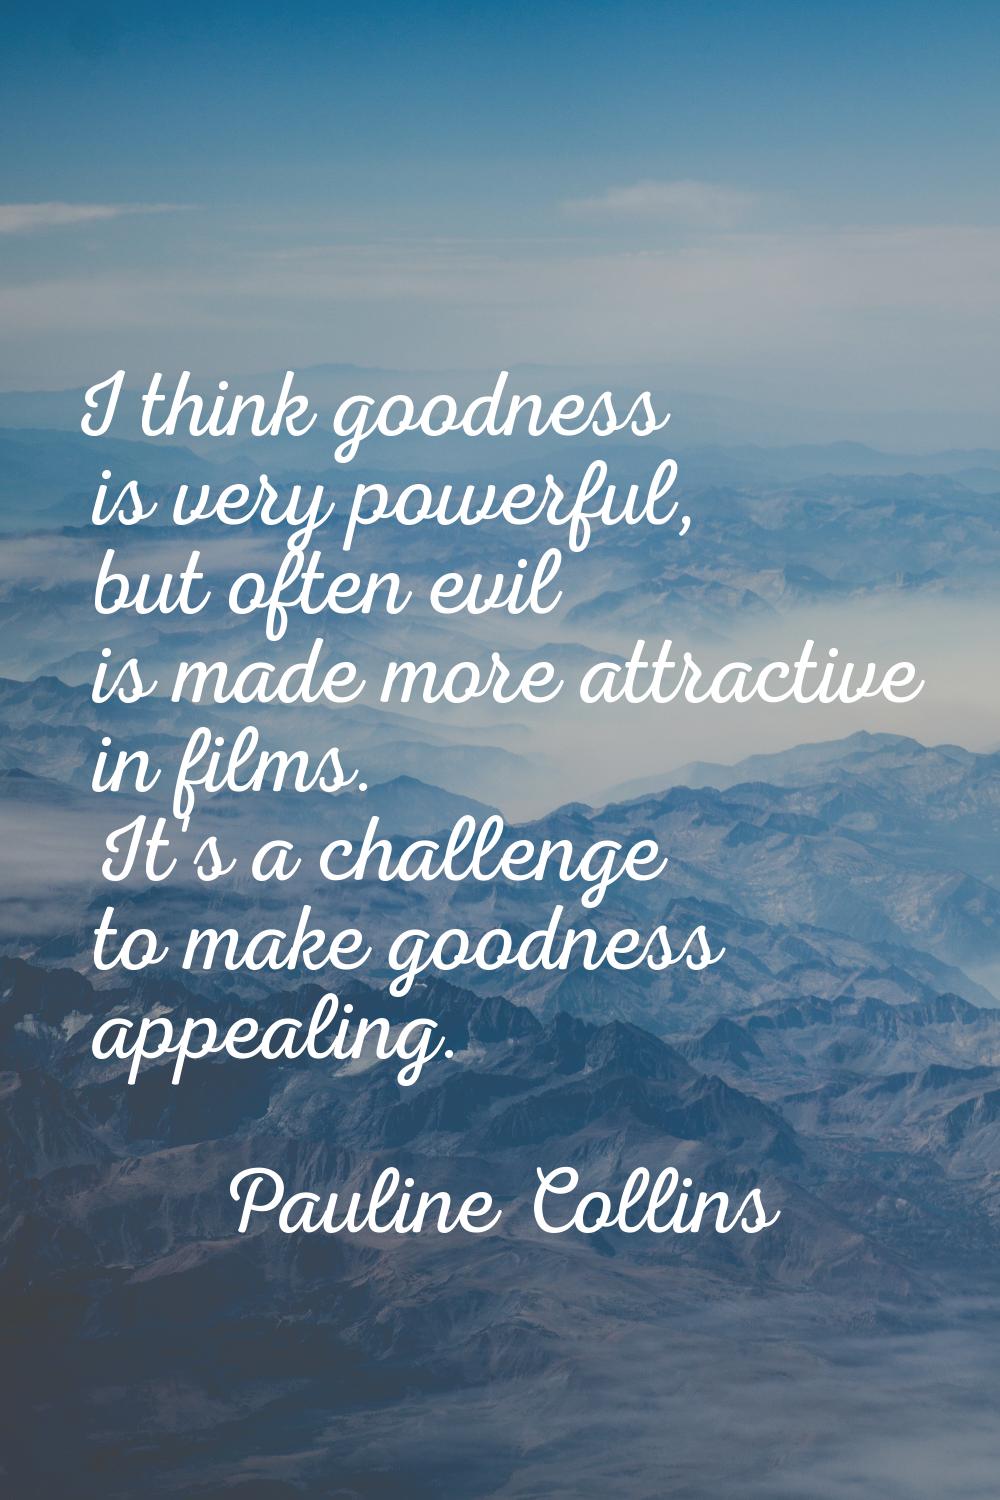 I think goodness is very powerful, but often evil is made more attractive in films. It's a challeng